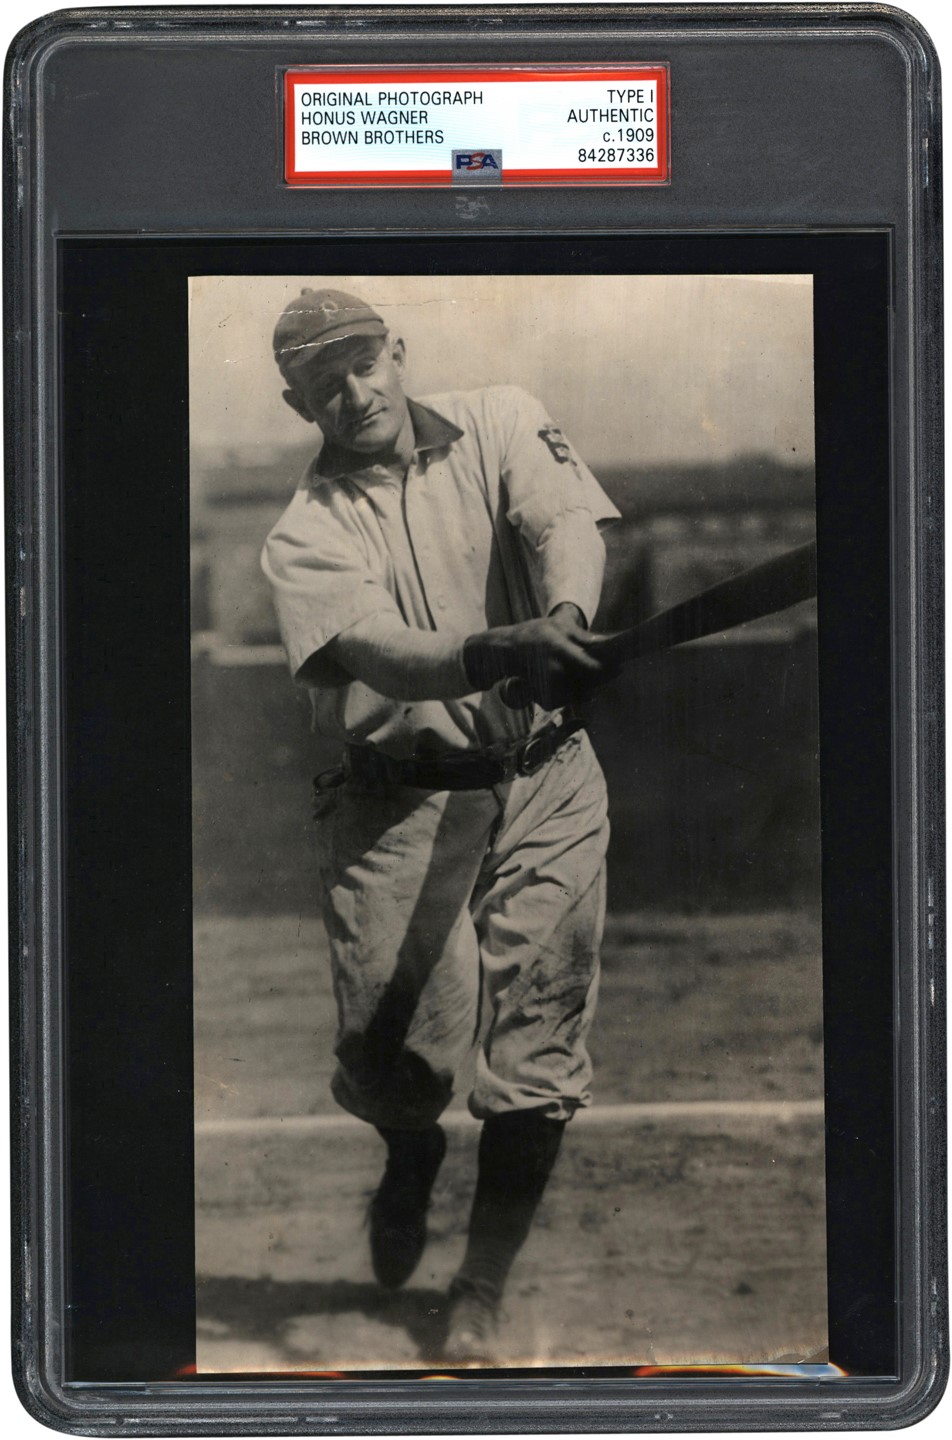 The Brown Brothers Collection - Honus Wagner Pittsburgh Pirates Photograph (PSA Type I)